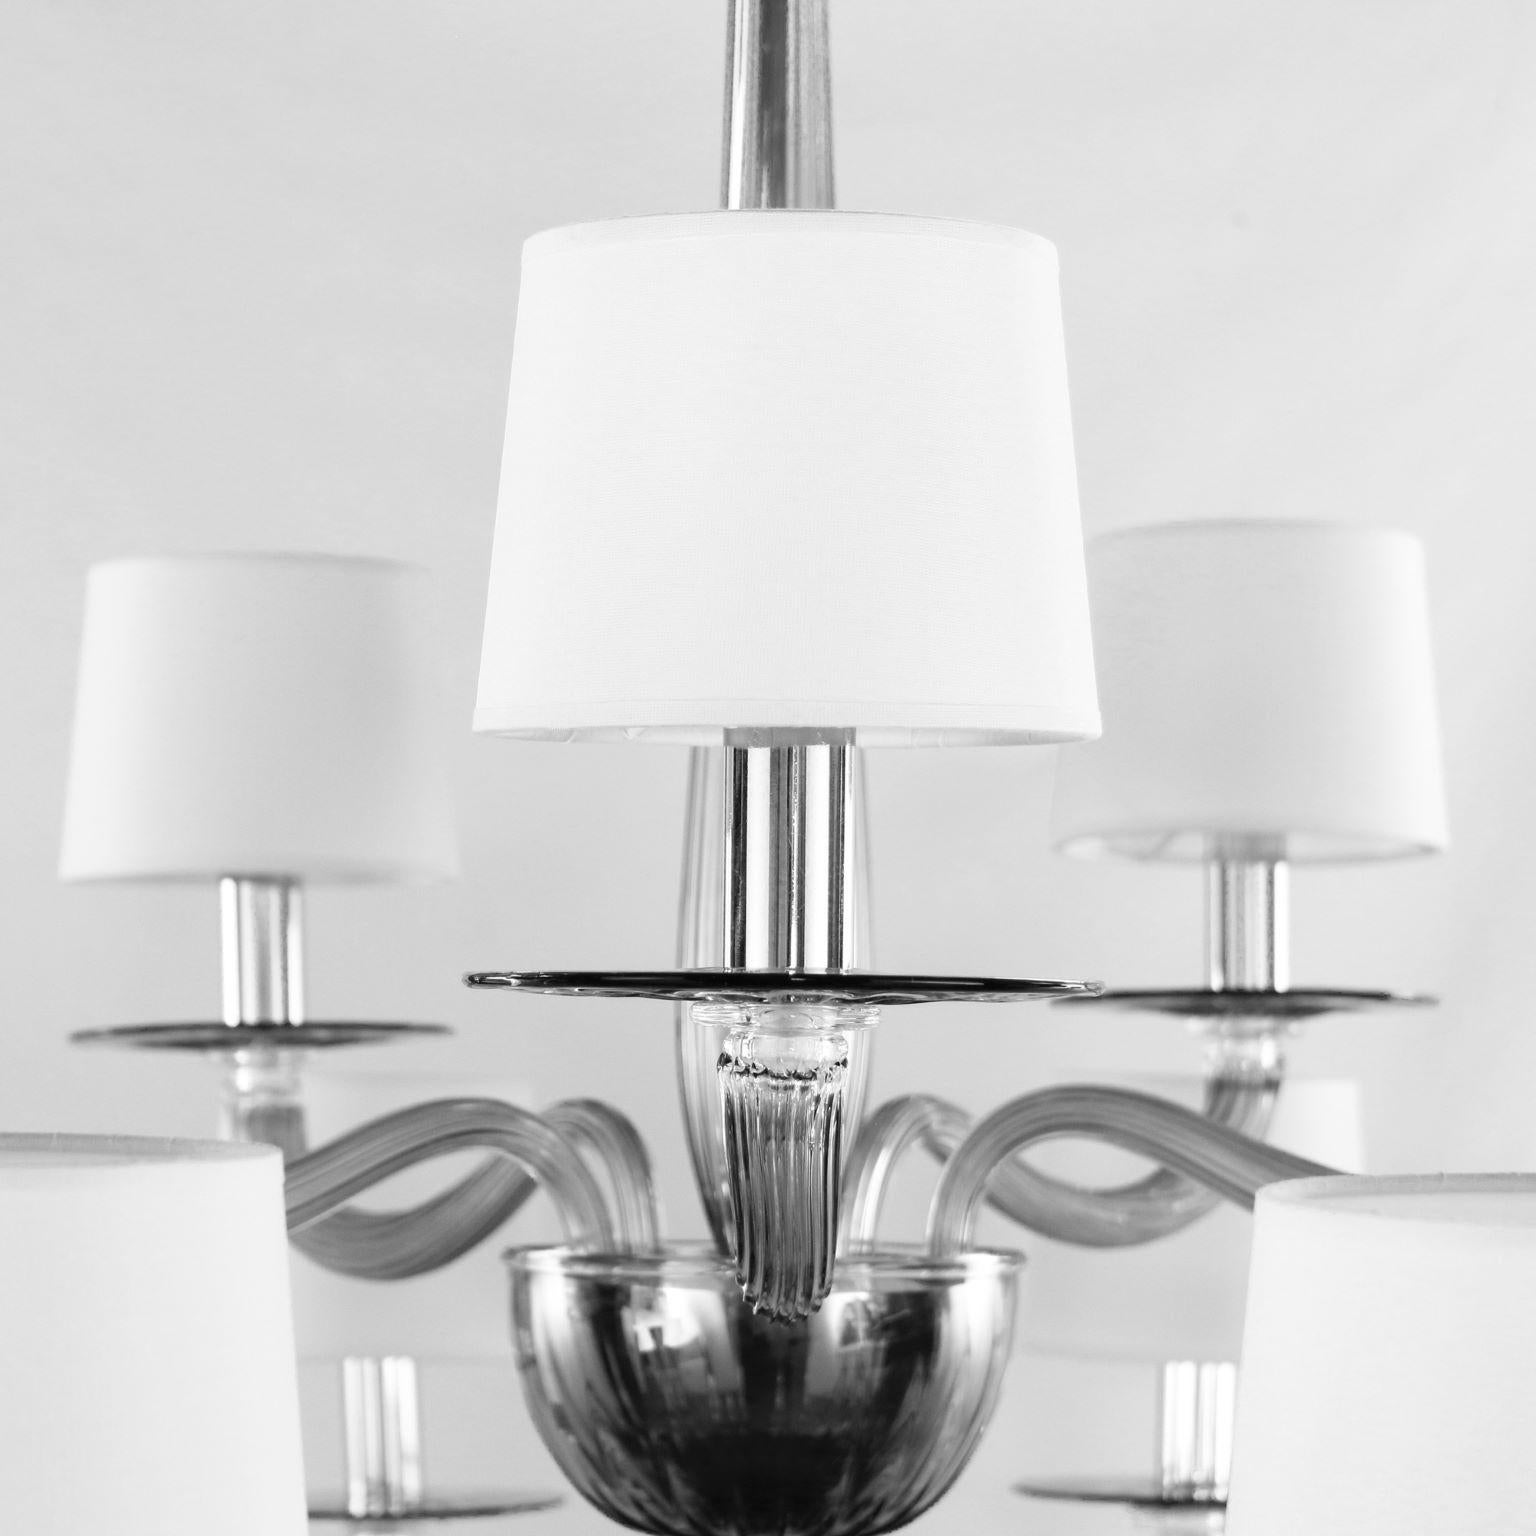 Serenade chandelier 10+5 lights grey Murano glass, white handmade cotton lampshades by Multiforme.
Serenade collection is inspired by a contemporary and international design, simple but not banal, and consists of elements studied in minute detail.